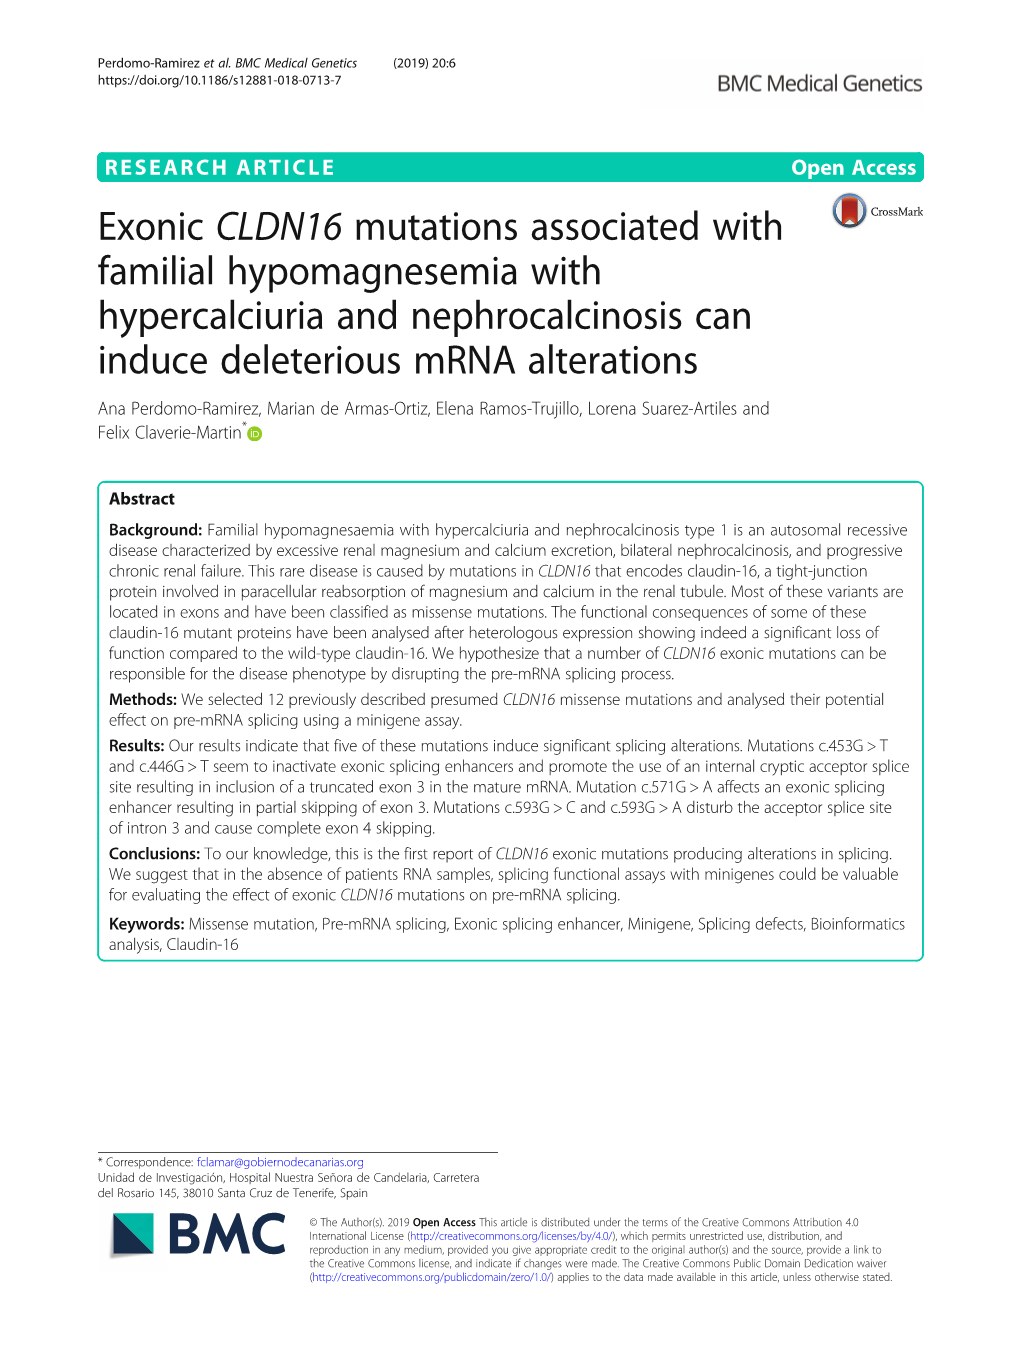 Exonic CLDN16 Mutations Associated with Familial Hypomagnesemia With